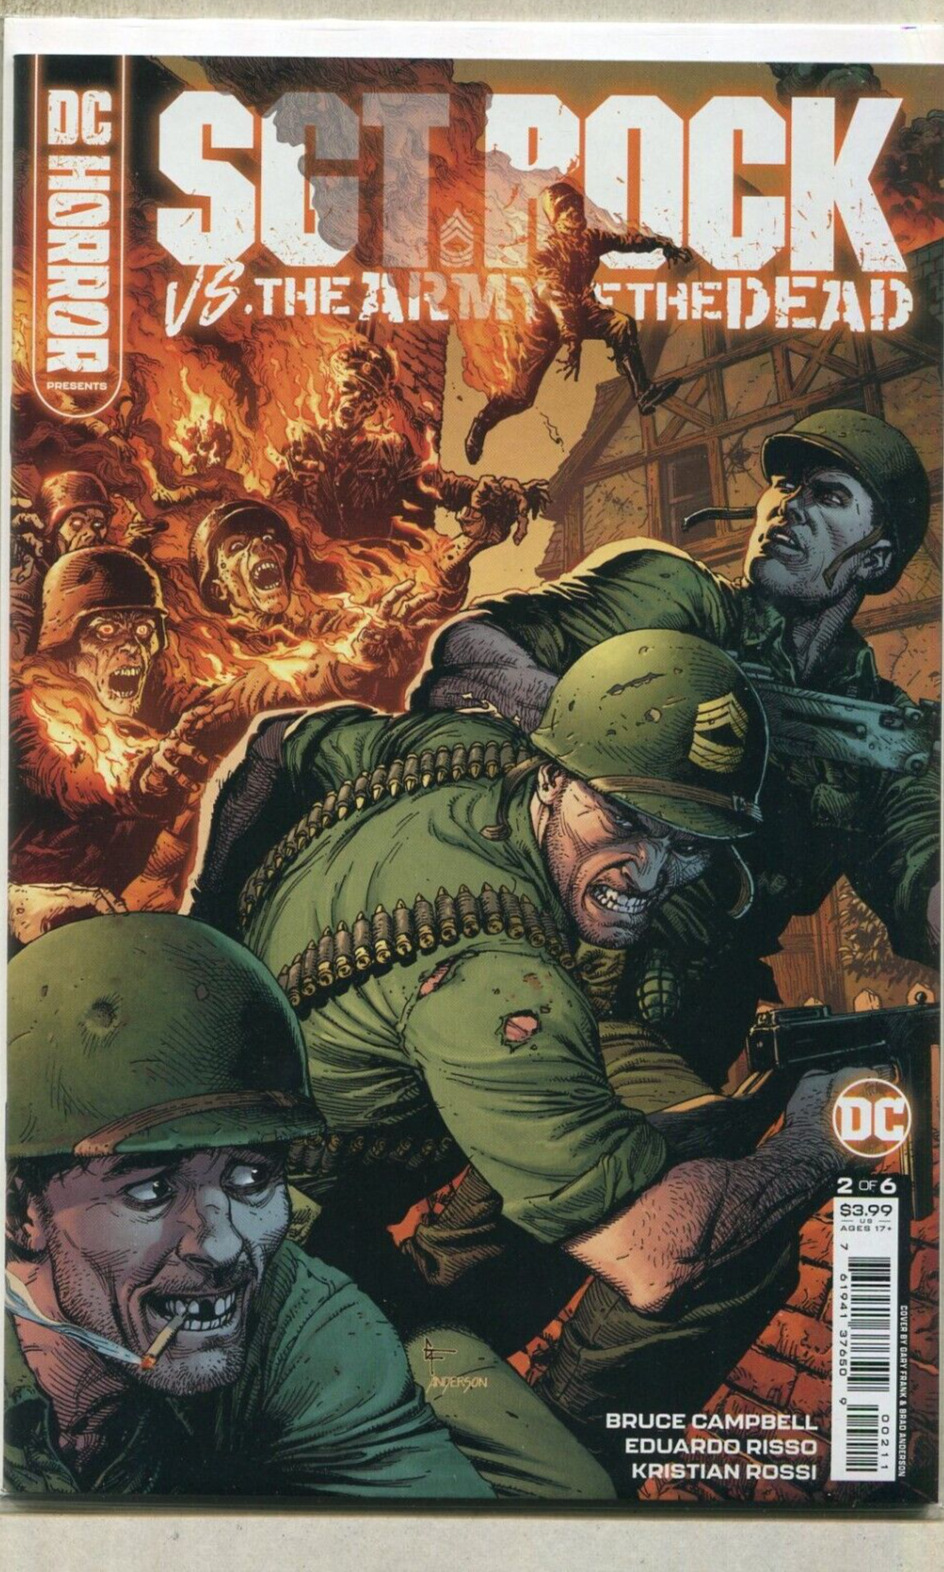 Sgt. Rock Vs The Army Of The Dead #2 of 6 NM   DC Comics **25